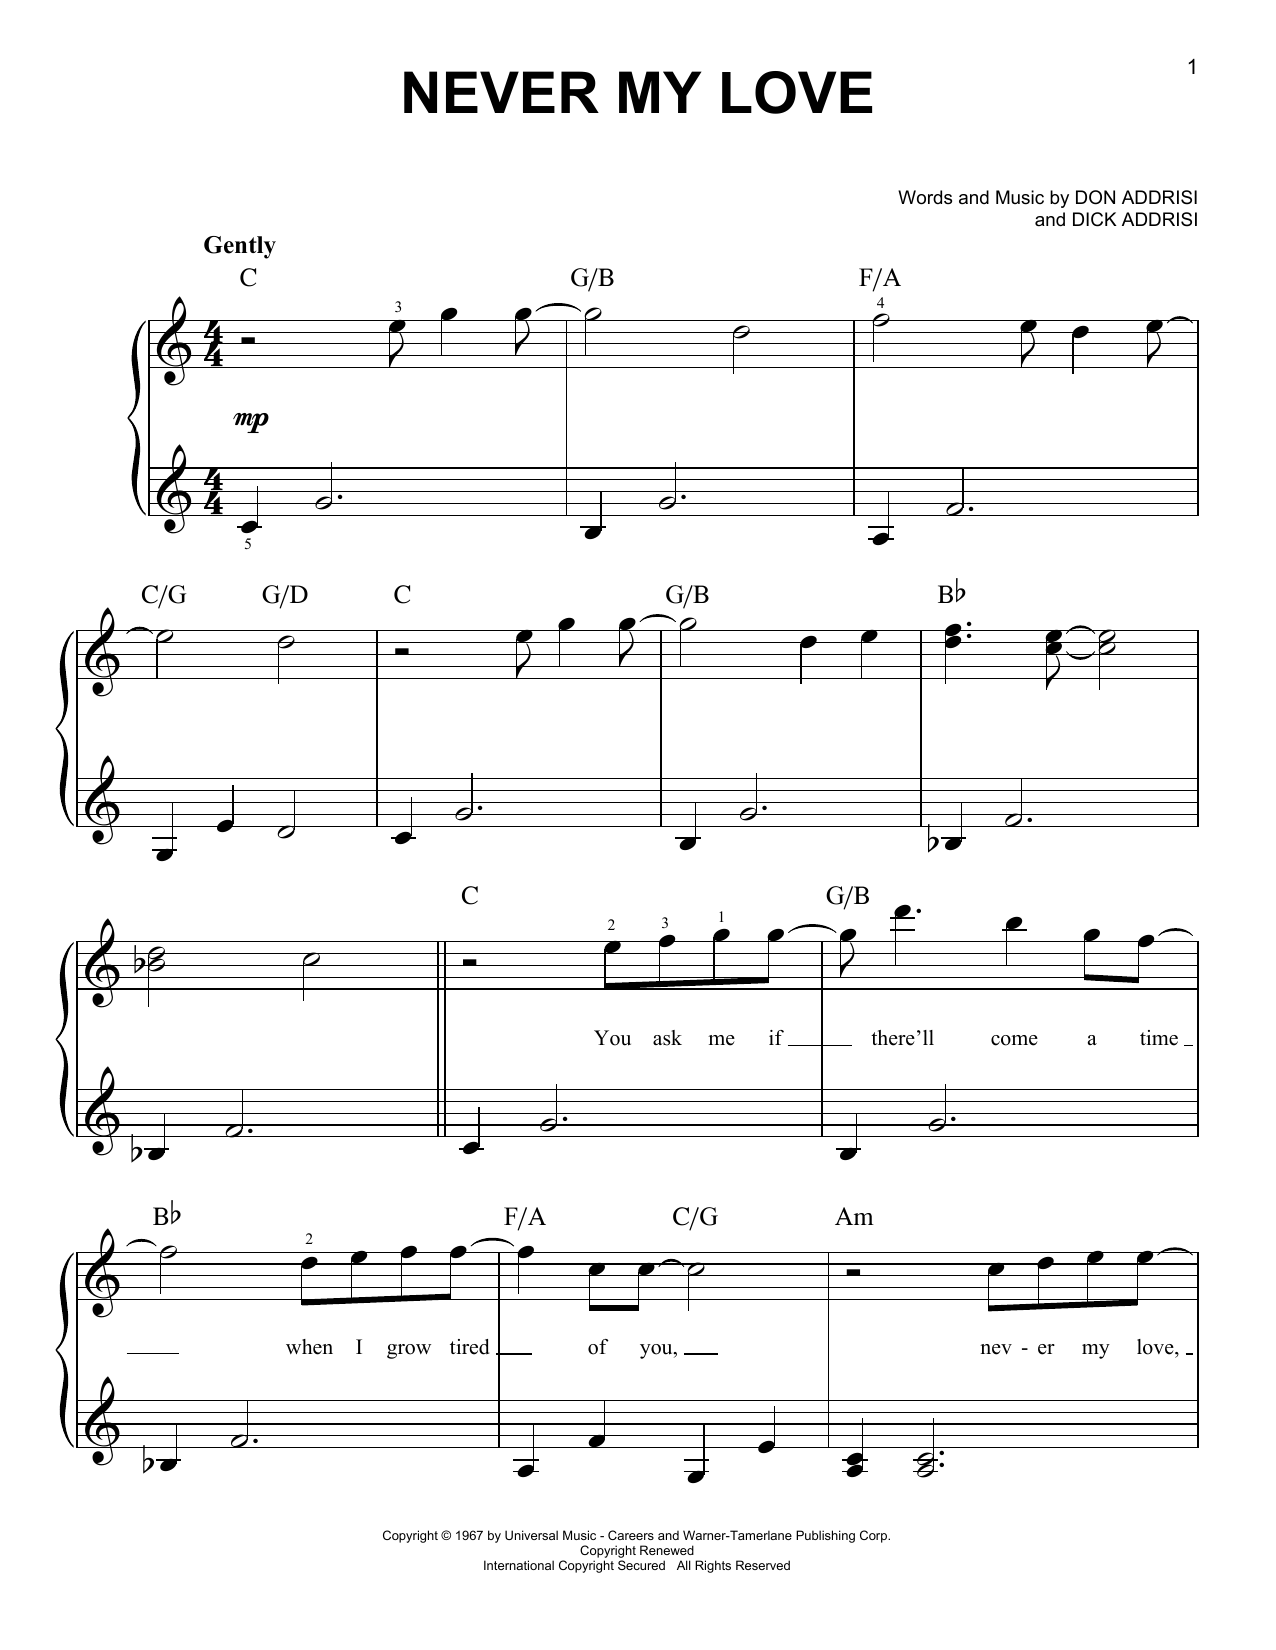 The Fifth Dimension Never My Love sheet music notes and chords. Download Printable PDF.